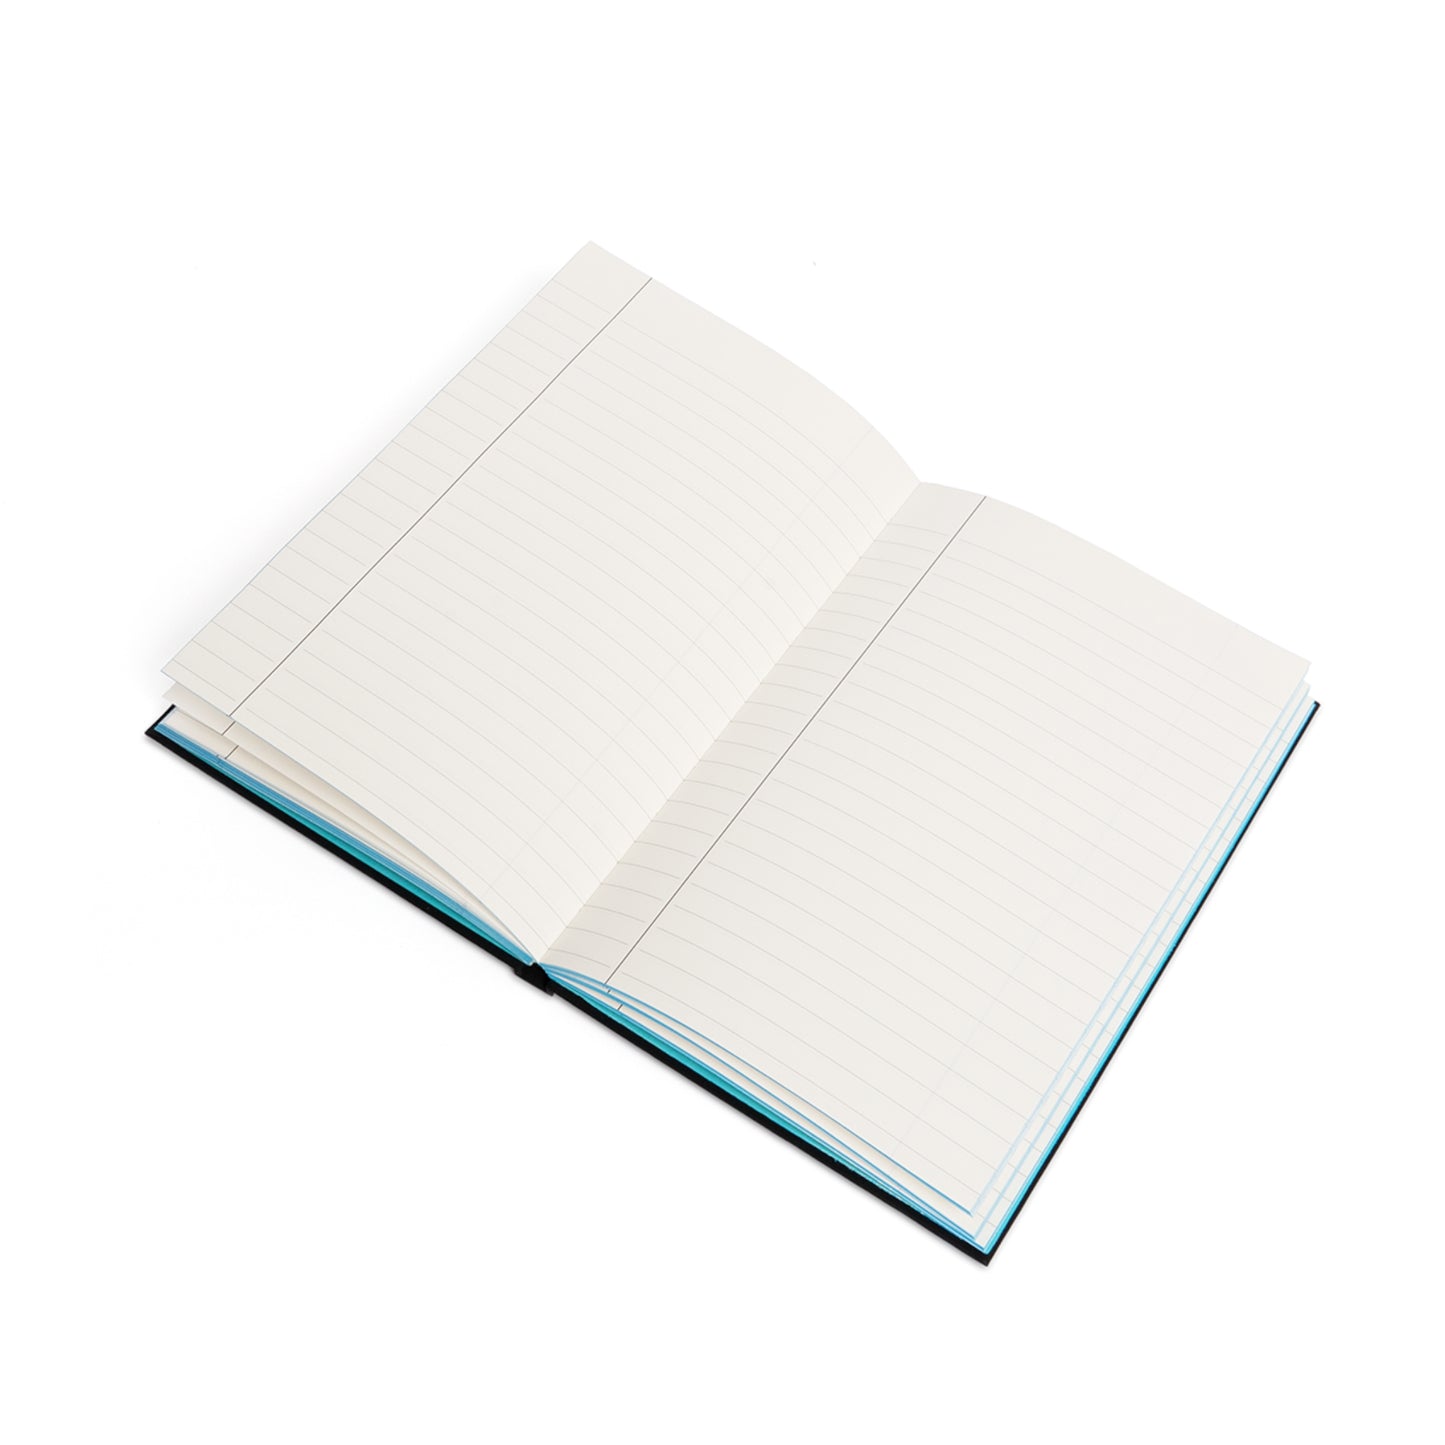 FAMA Collective Notebook (Ruled)